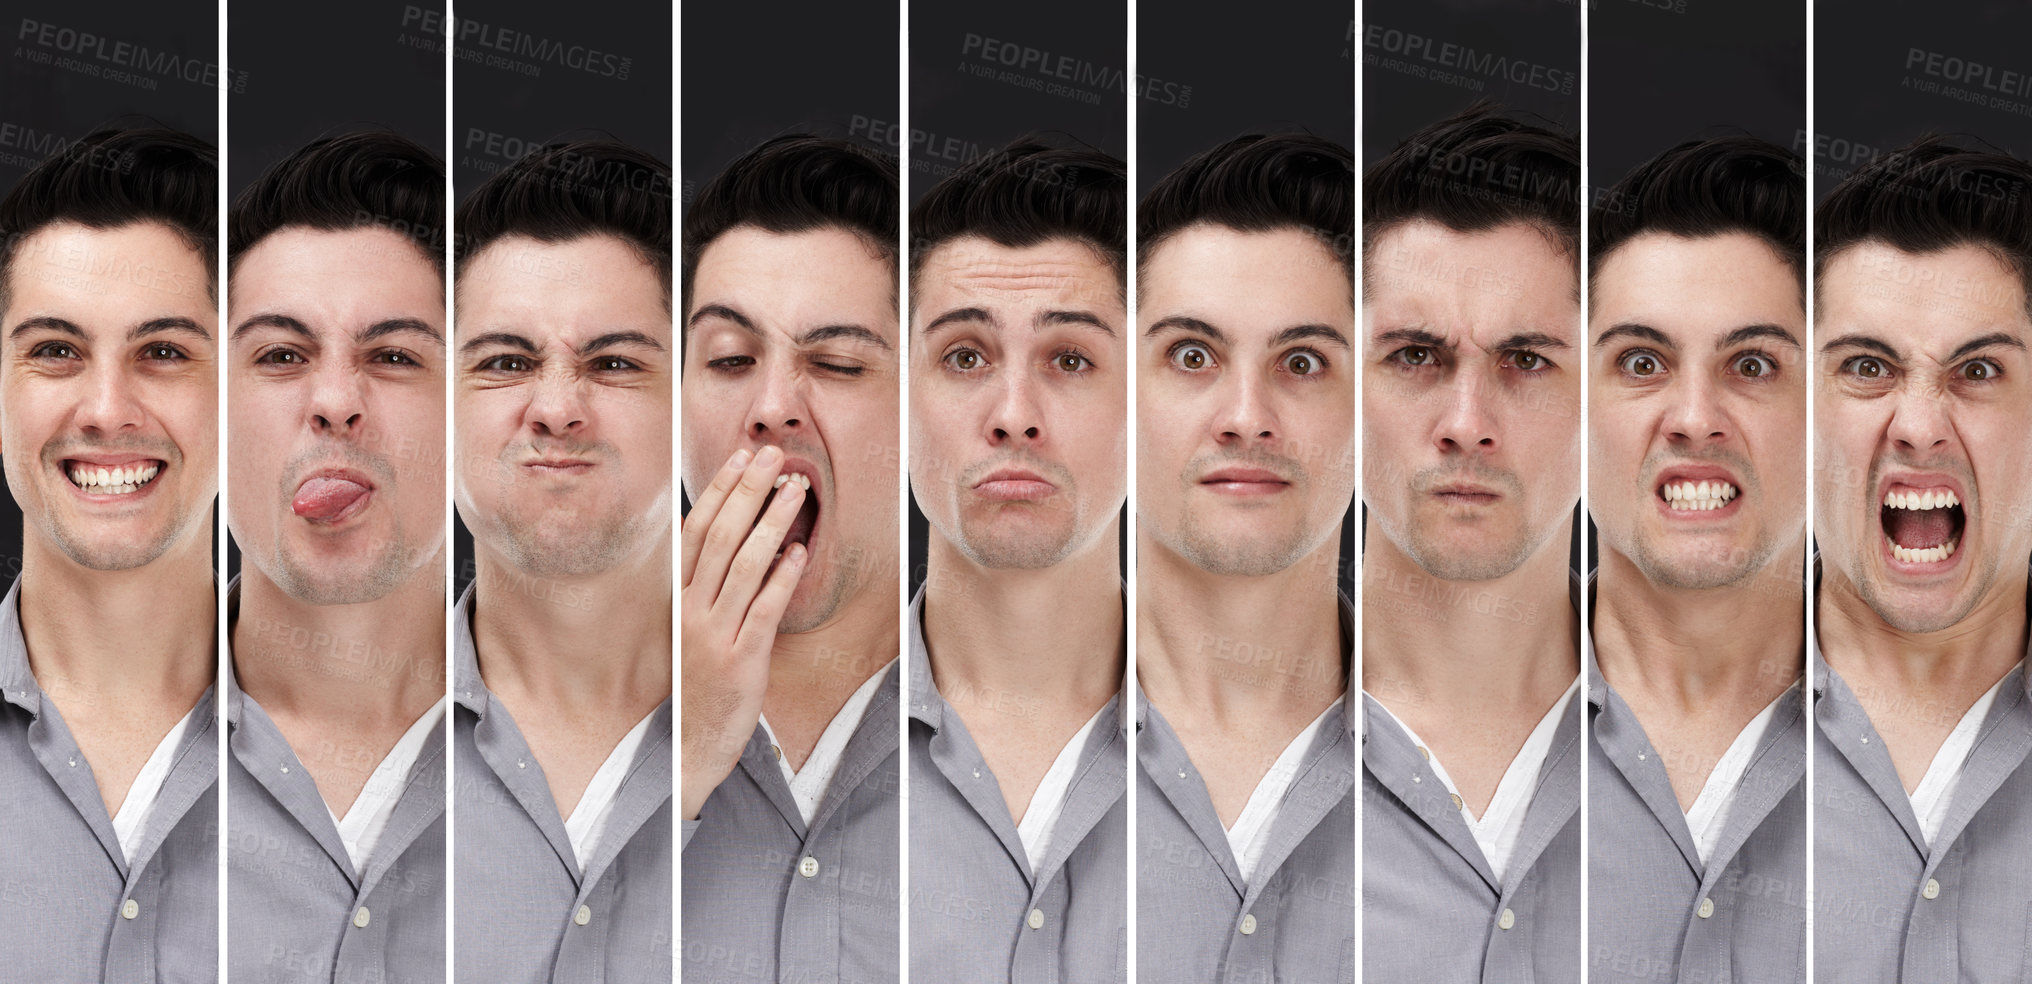 Buy stock photo Composite image of a young man displaying different personalities 